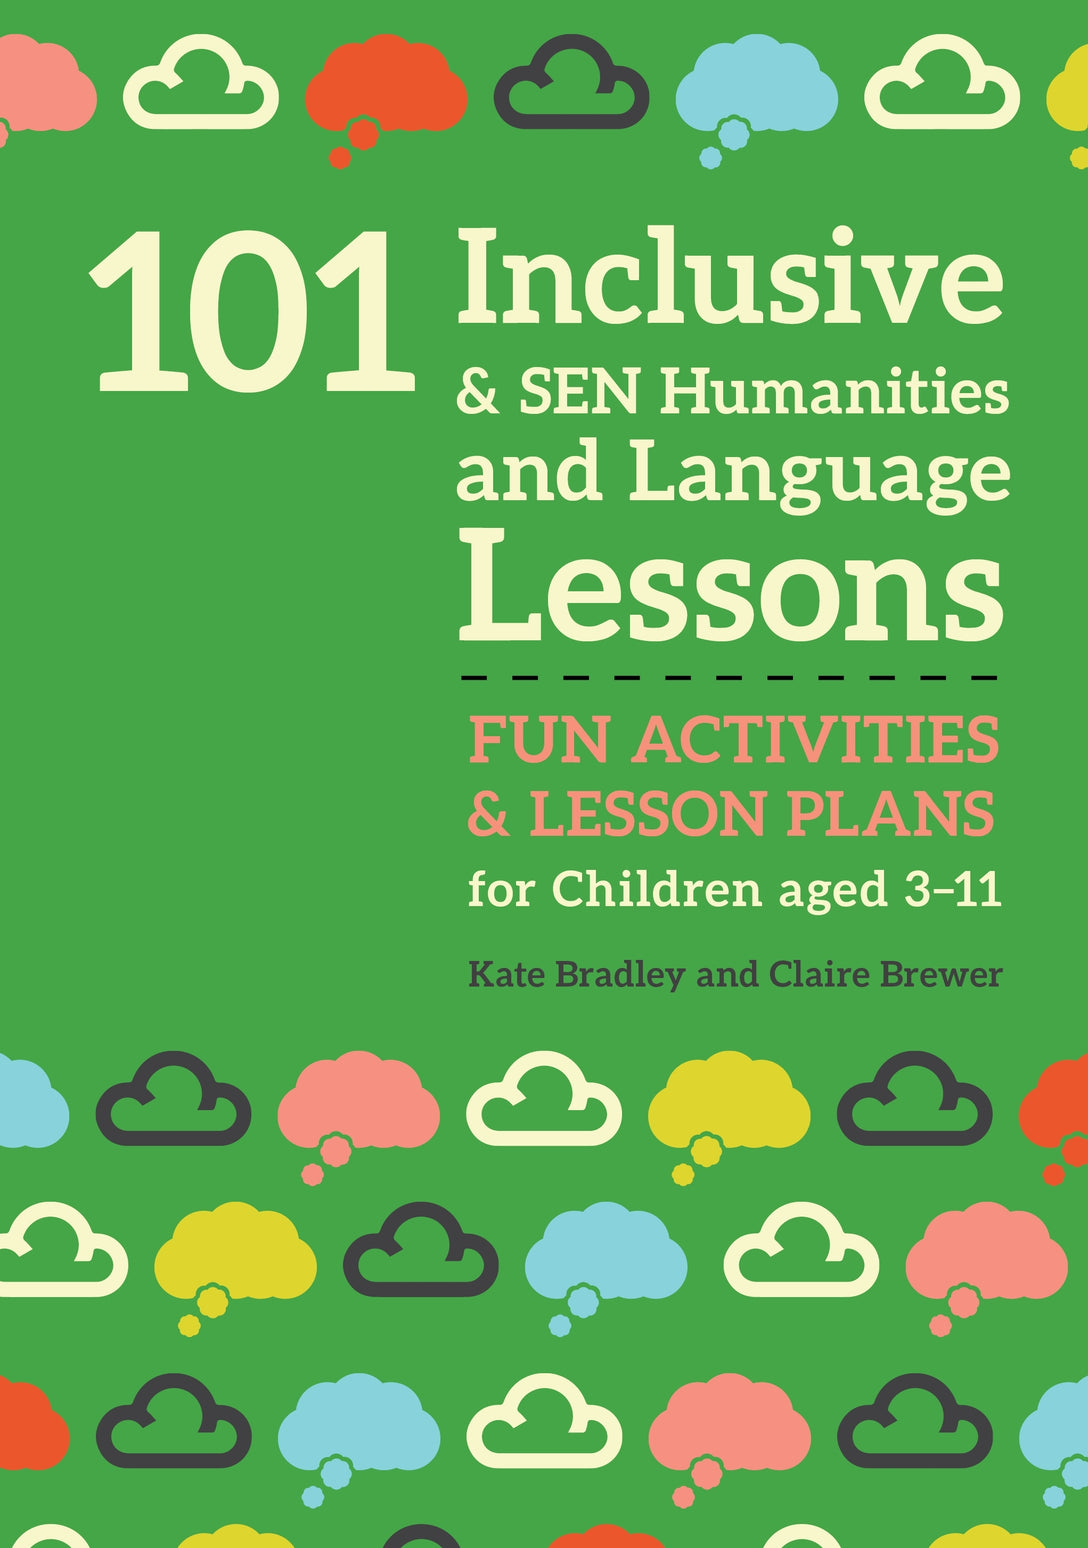 101 Inclusive and SEN Humanities and Language Lessons by Kate Bradley, Claire Brewer